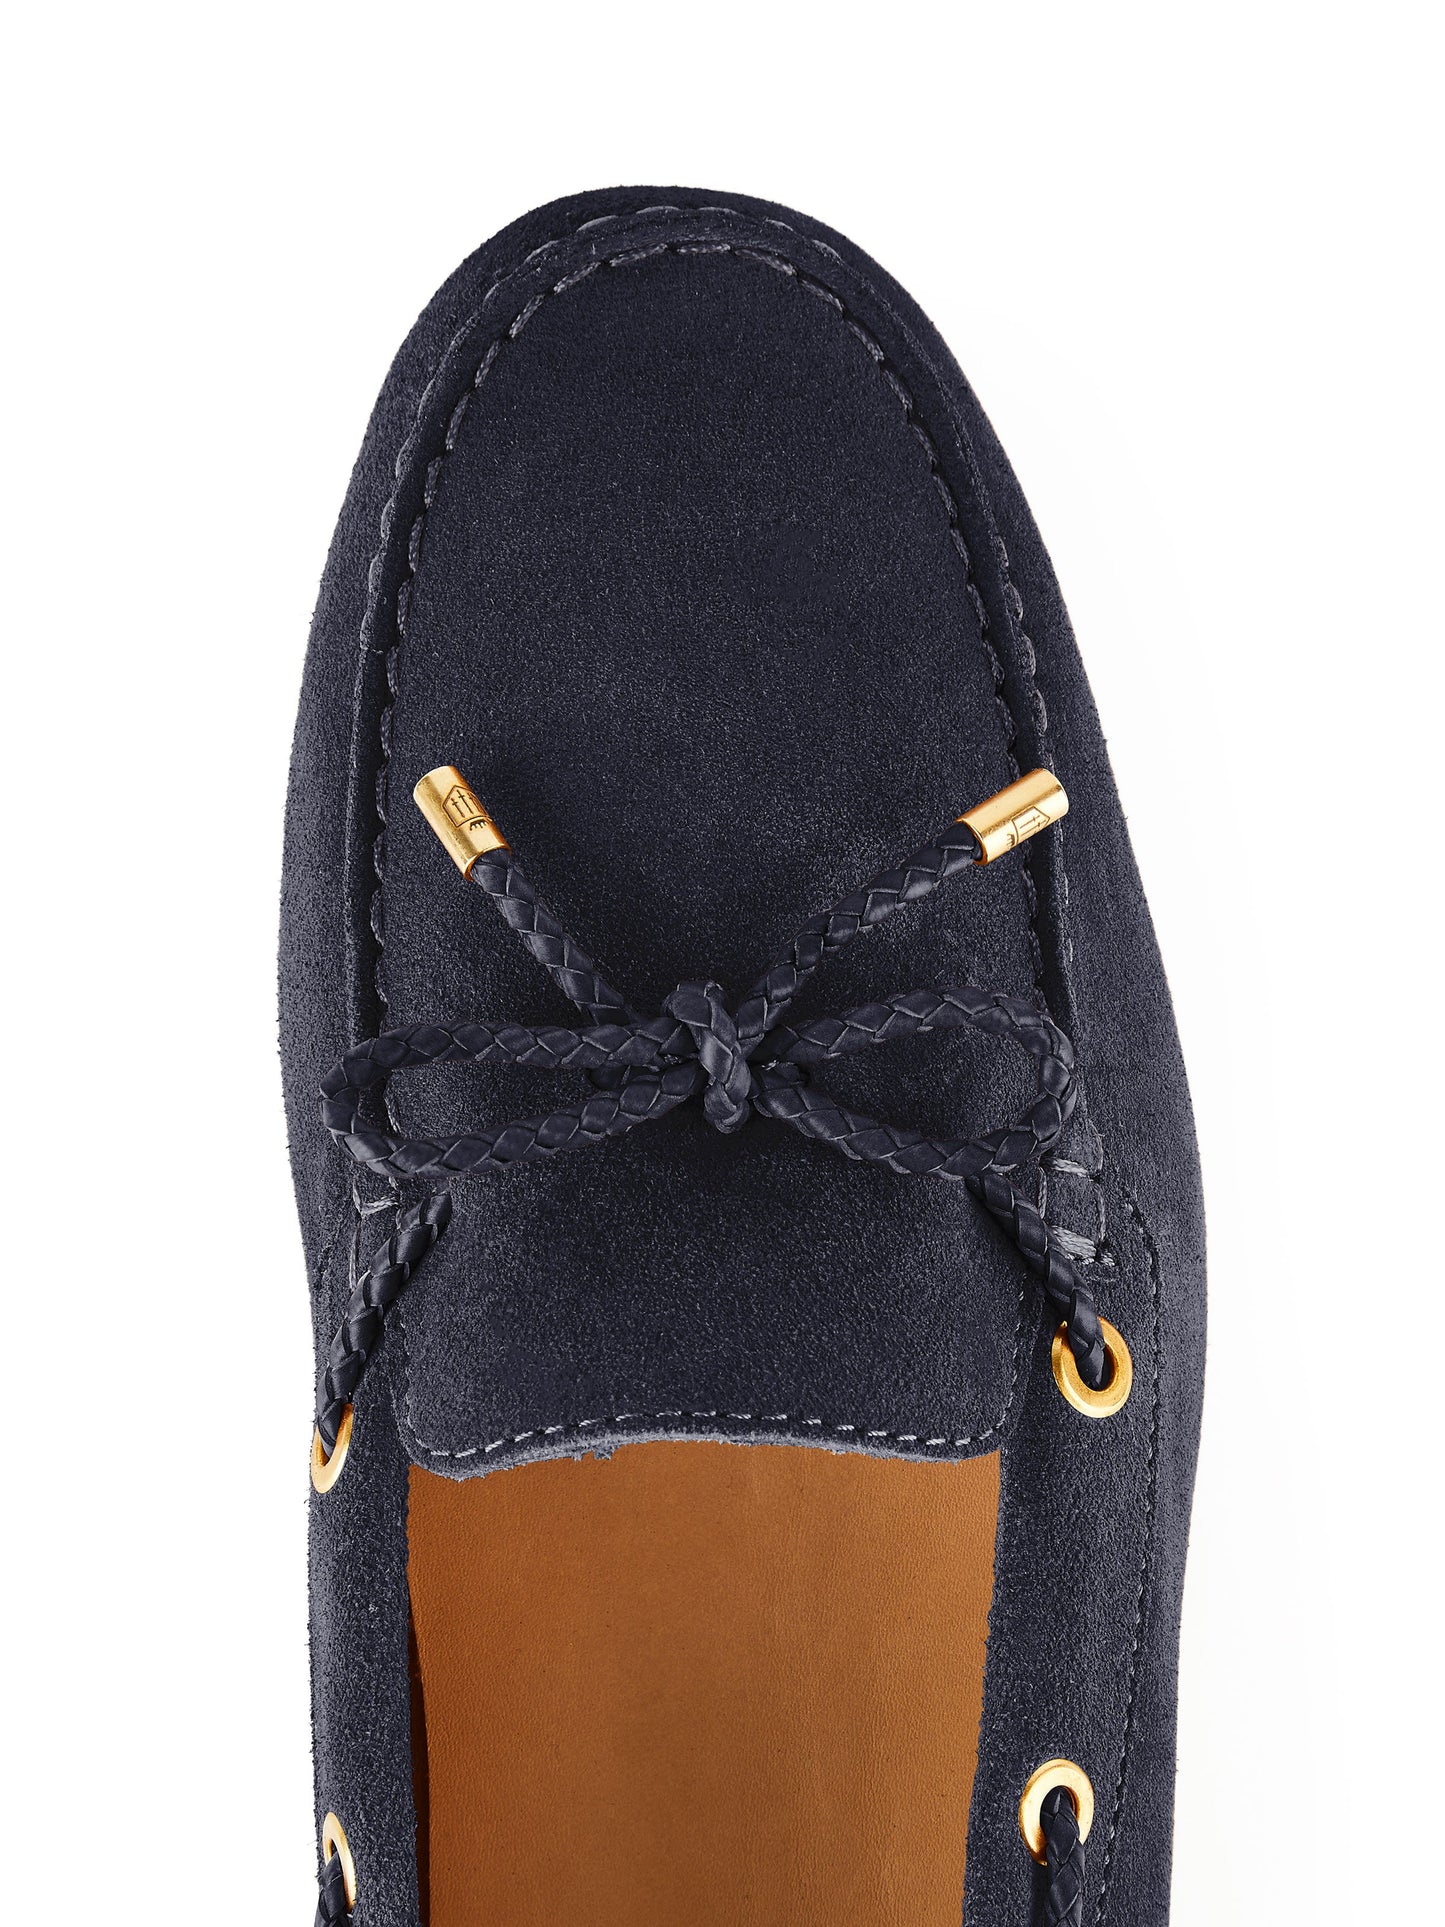 The Henley Driving Shoe - Navy Suede